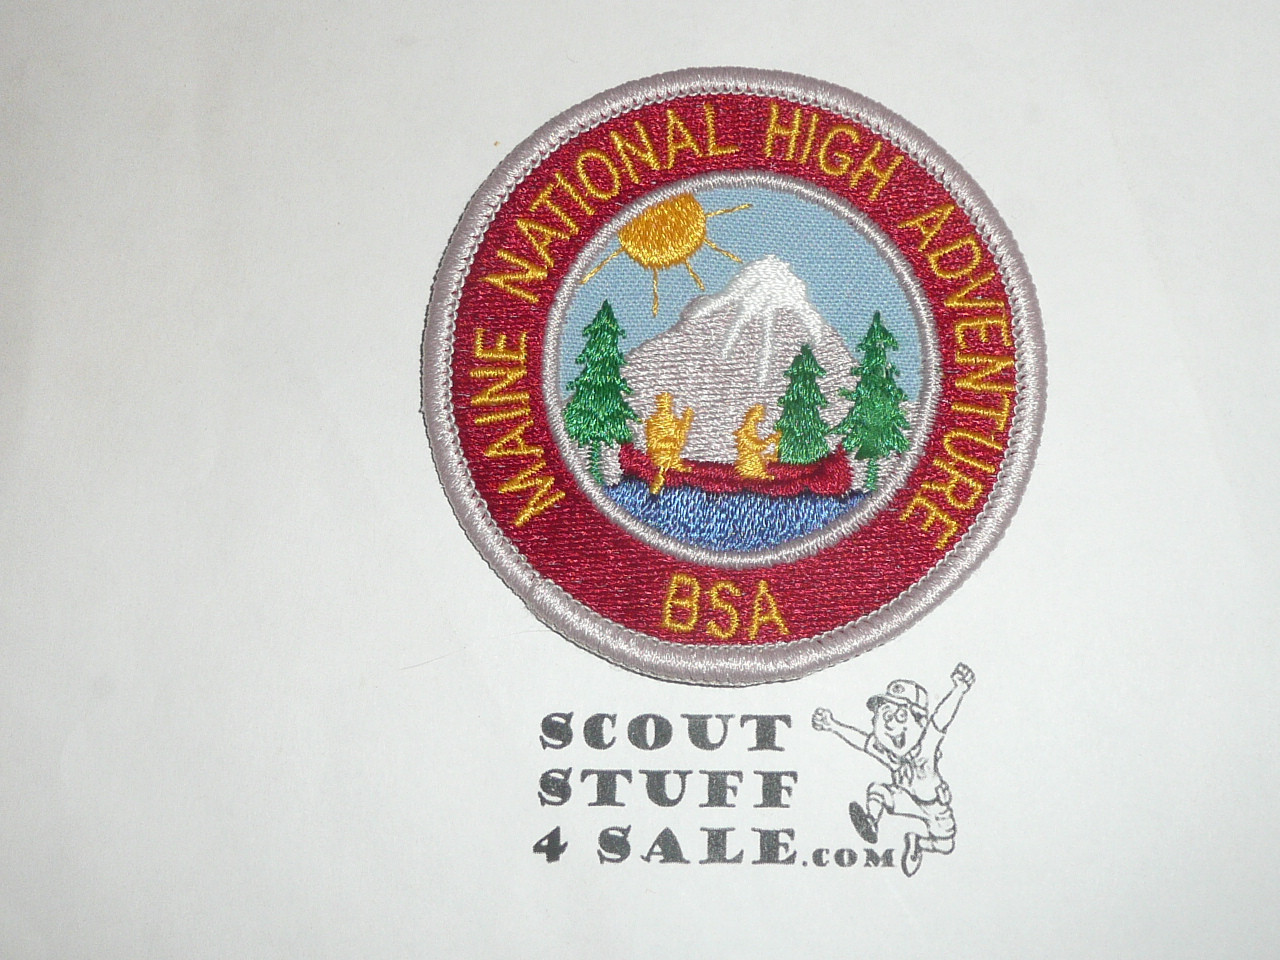 Maine National High Adventure Area 20th Anniversary Patch, 1990, #2